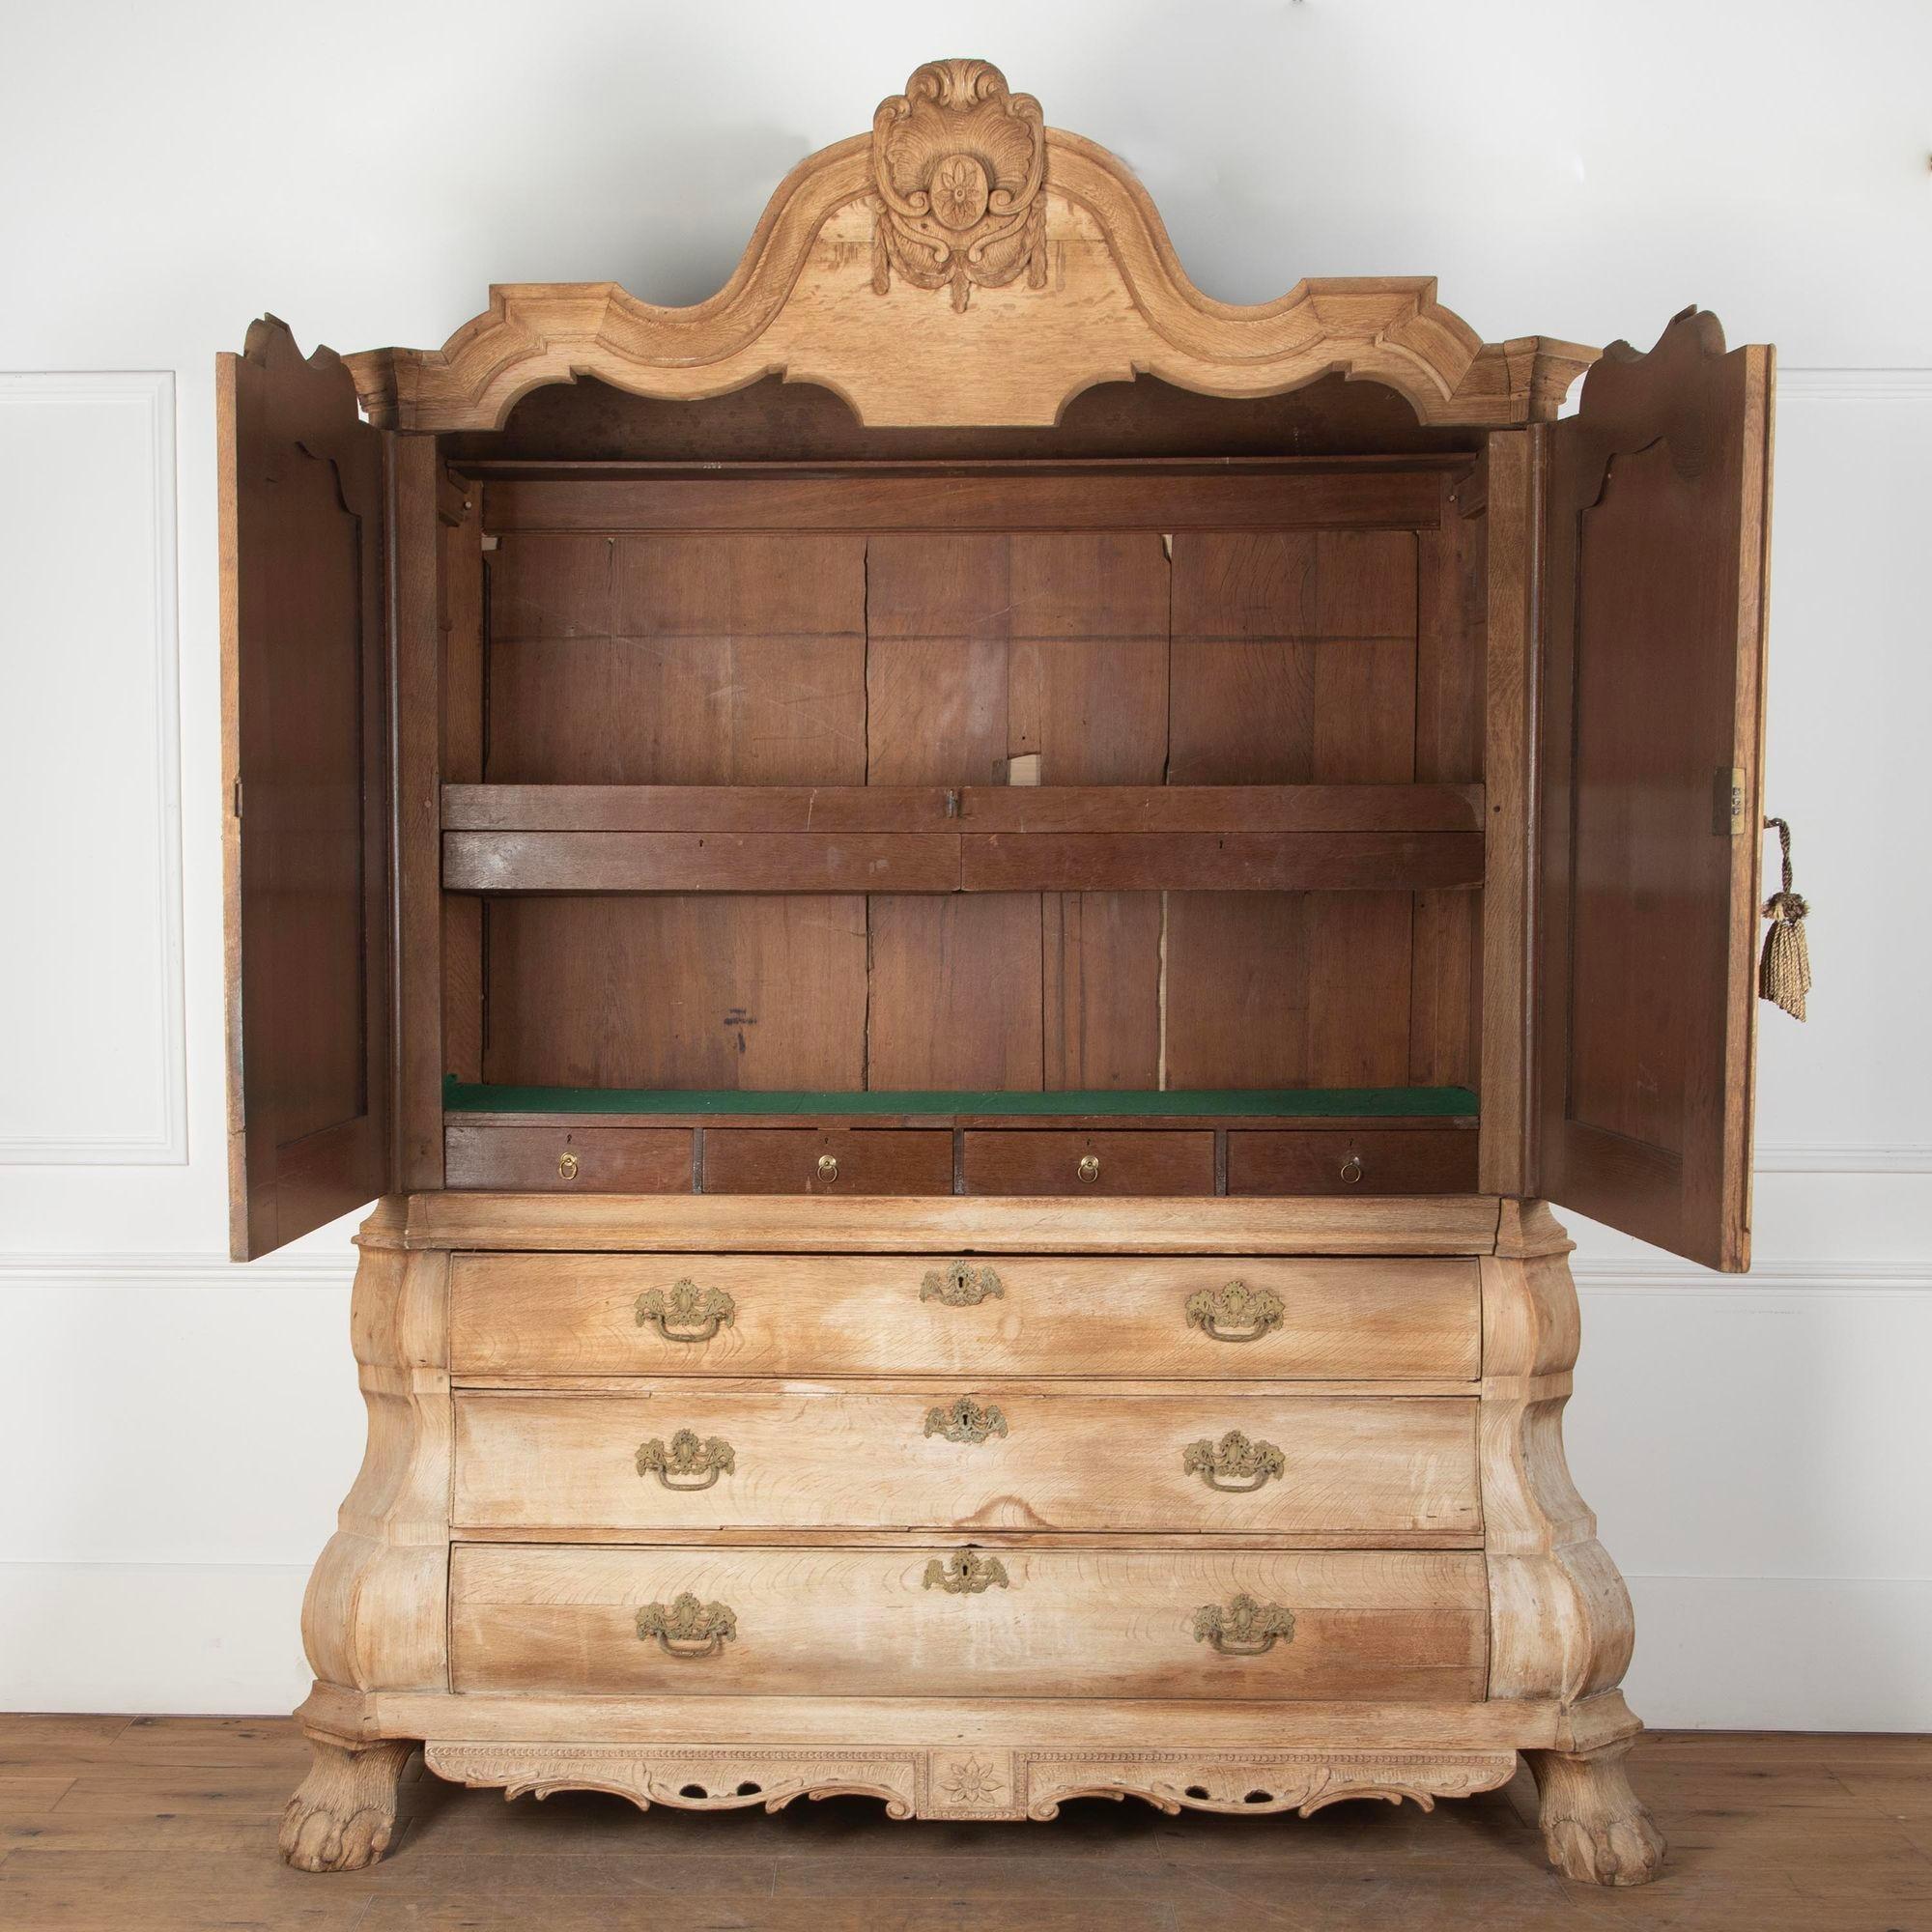 Mid 18th Century bleached oak Dutch cabinet on chest.
Arched pediment with carved shell crest and finely moulded cornice above two wavy top panelled doors with carved rosettes to each corner.
Reinstated original interior with later felt